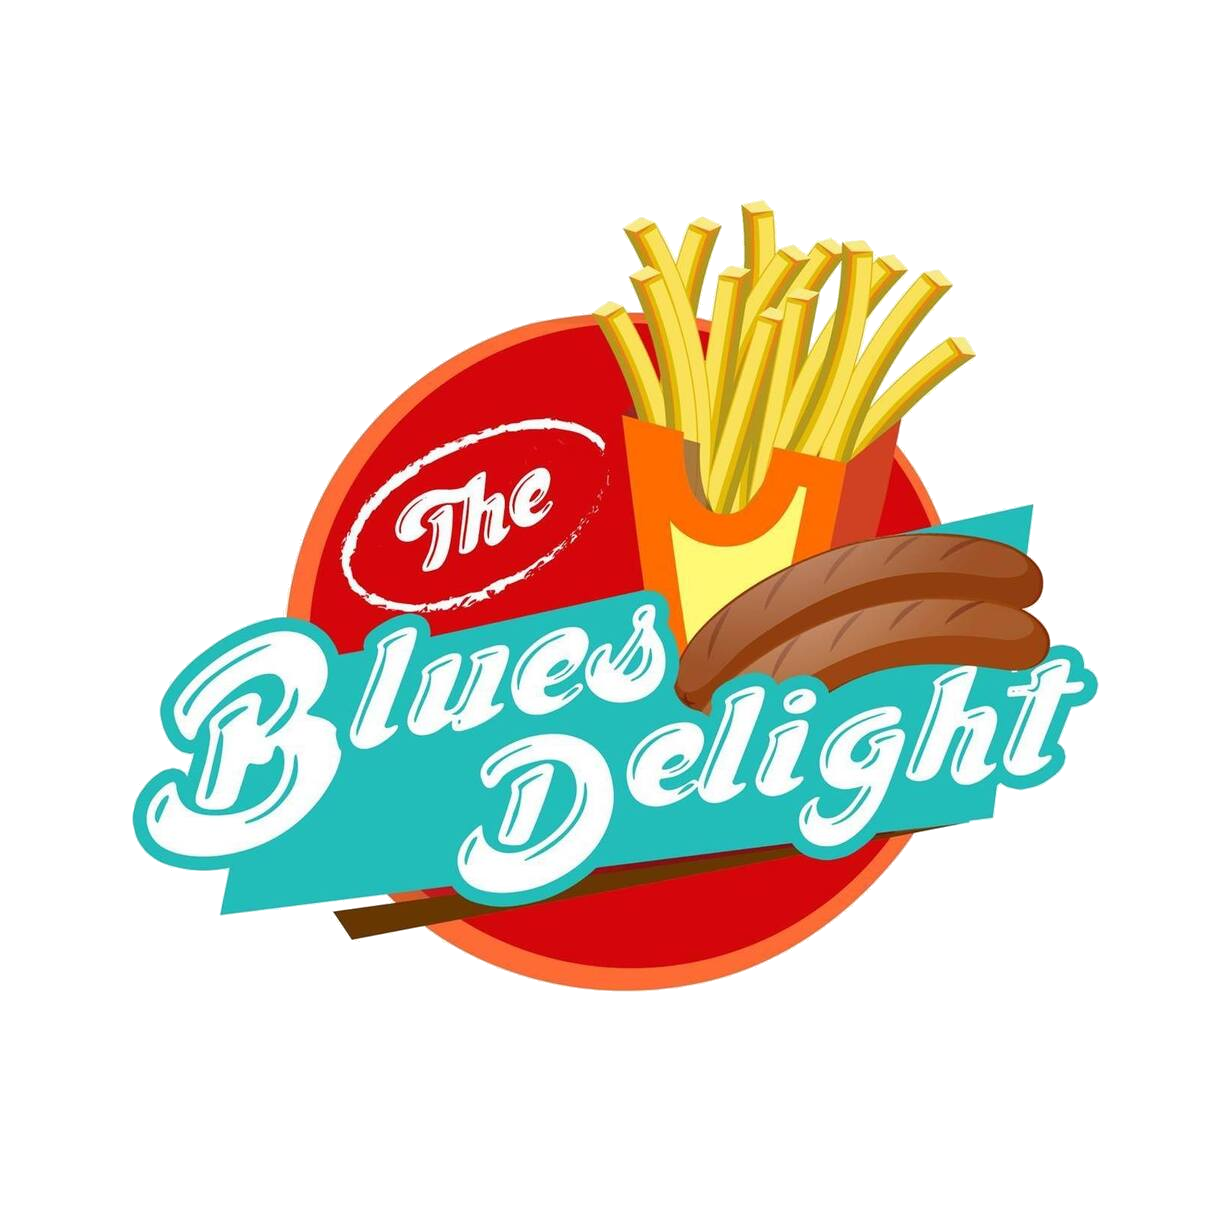 The Blues Delight